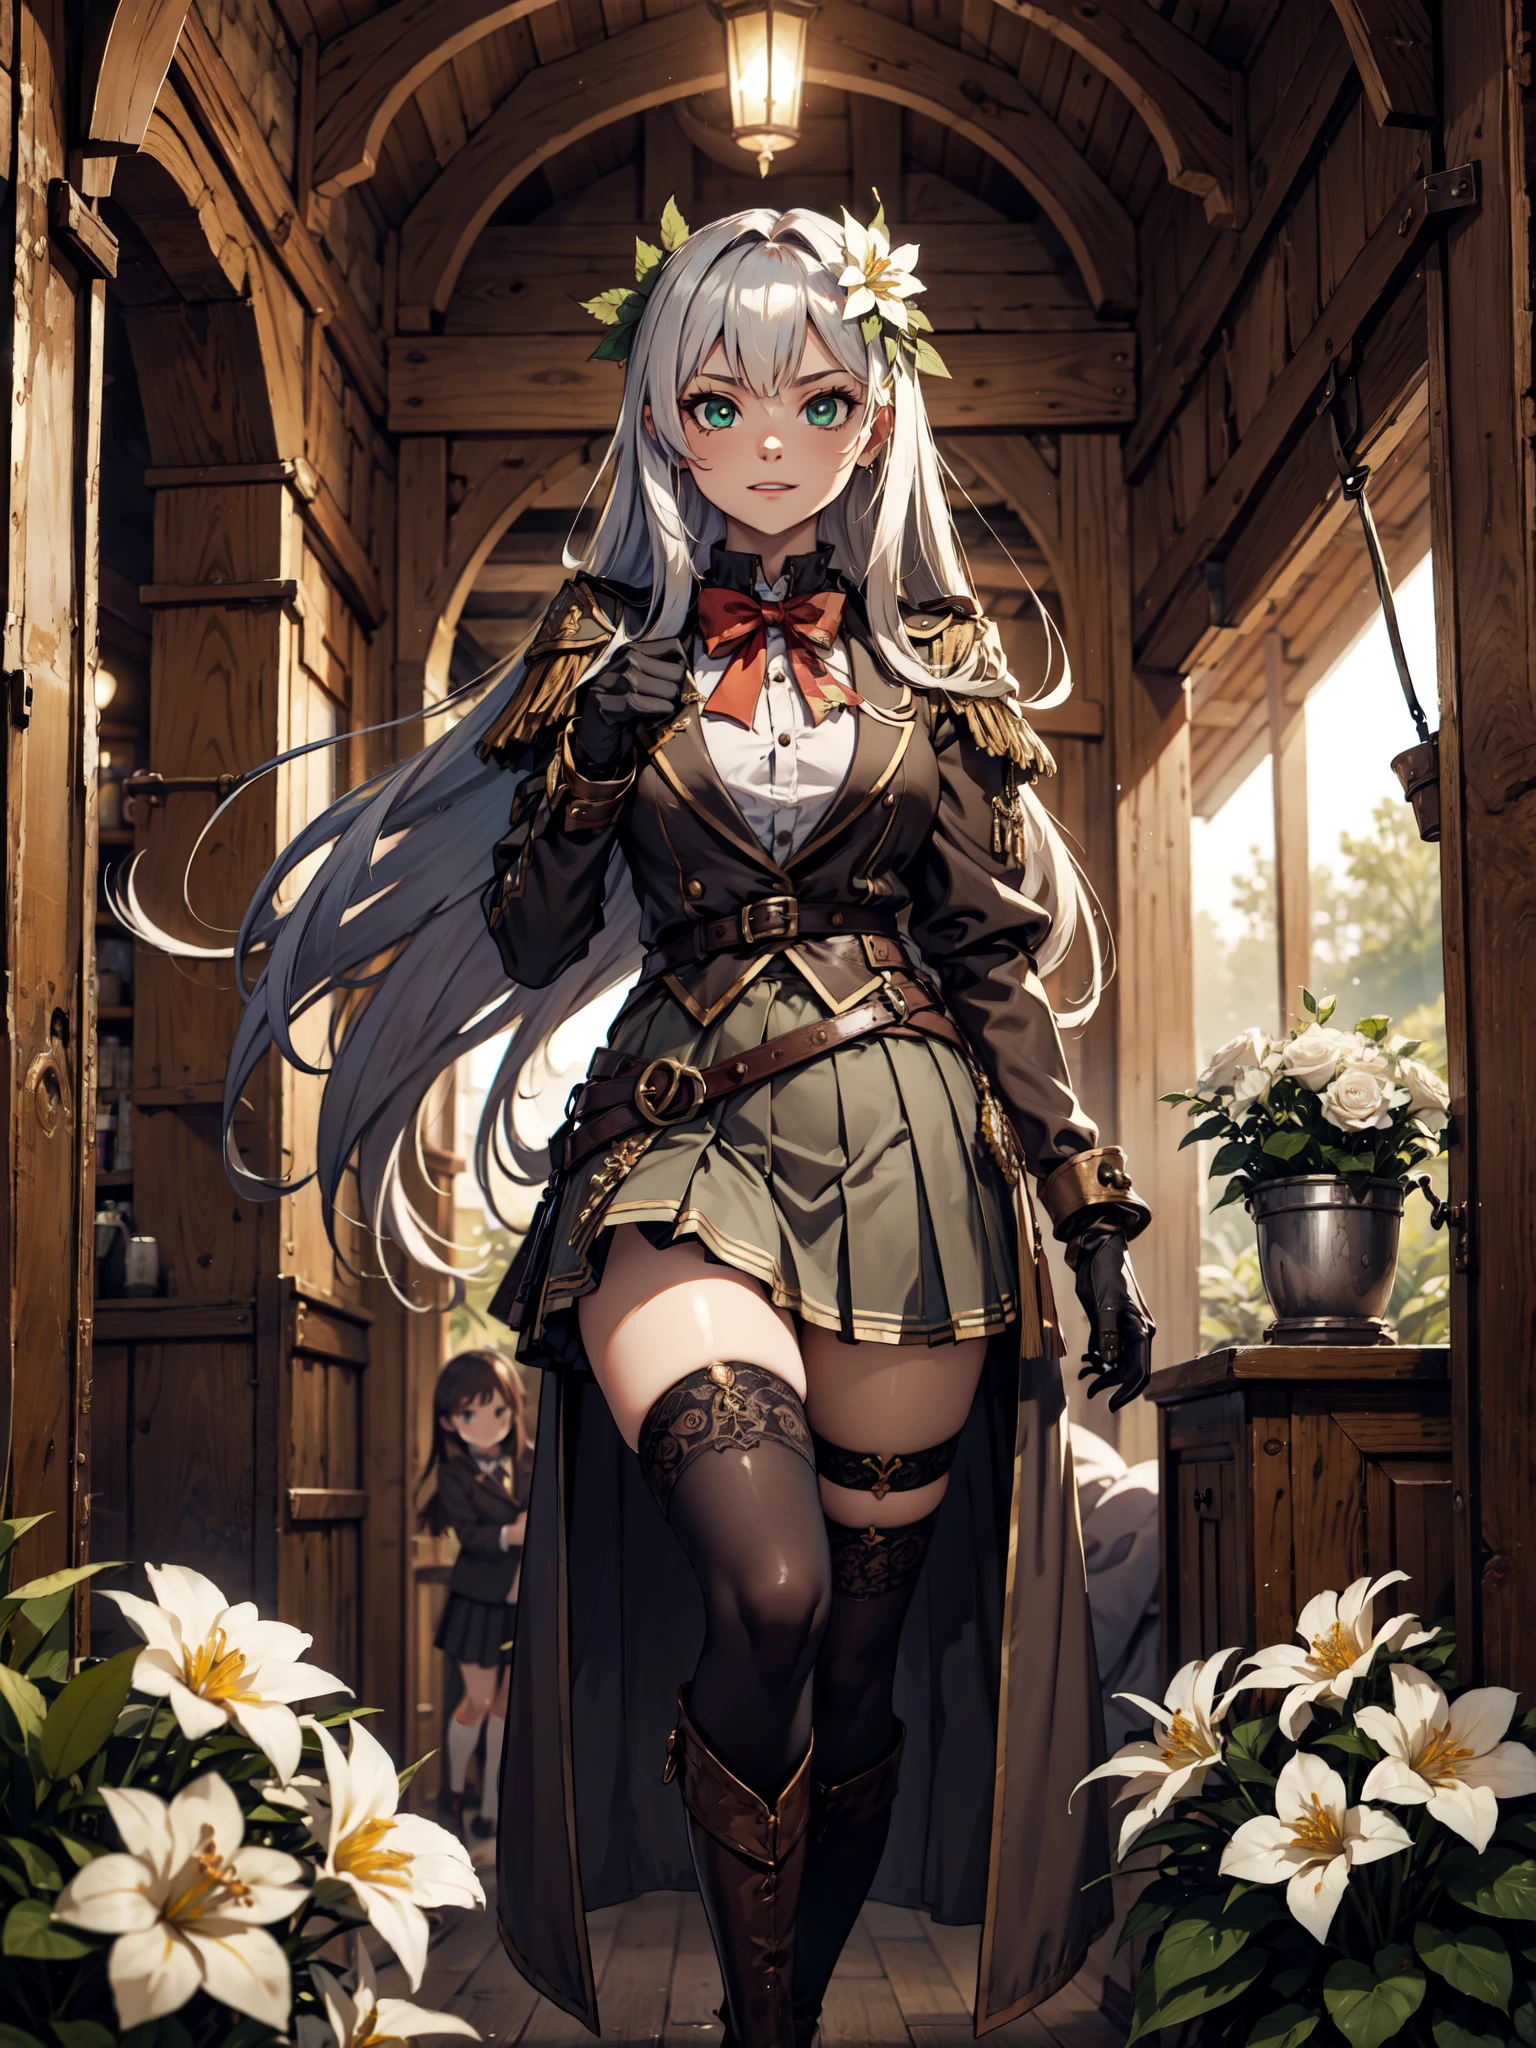 Ultra High Definition, Ultra High Quality, Hyper Definition, Hyper Quality, Hyper Detailed, Extremely Detailed, Perfectly Detailed, 8k, 1 Anime Female,  Long Silver Hair, Women's Vest, ((Luxury School Pleated Skirt)), Brown Boots On Heels, Tights, Gloves, Solid Green Eyes, Cheerful Expression, White Flower Barrette, Dressed in  , Forest Panoramic Background